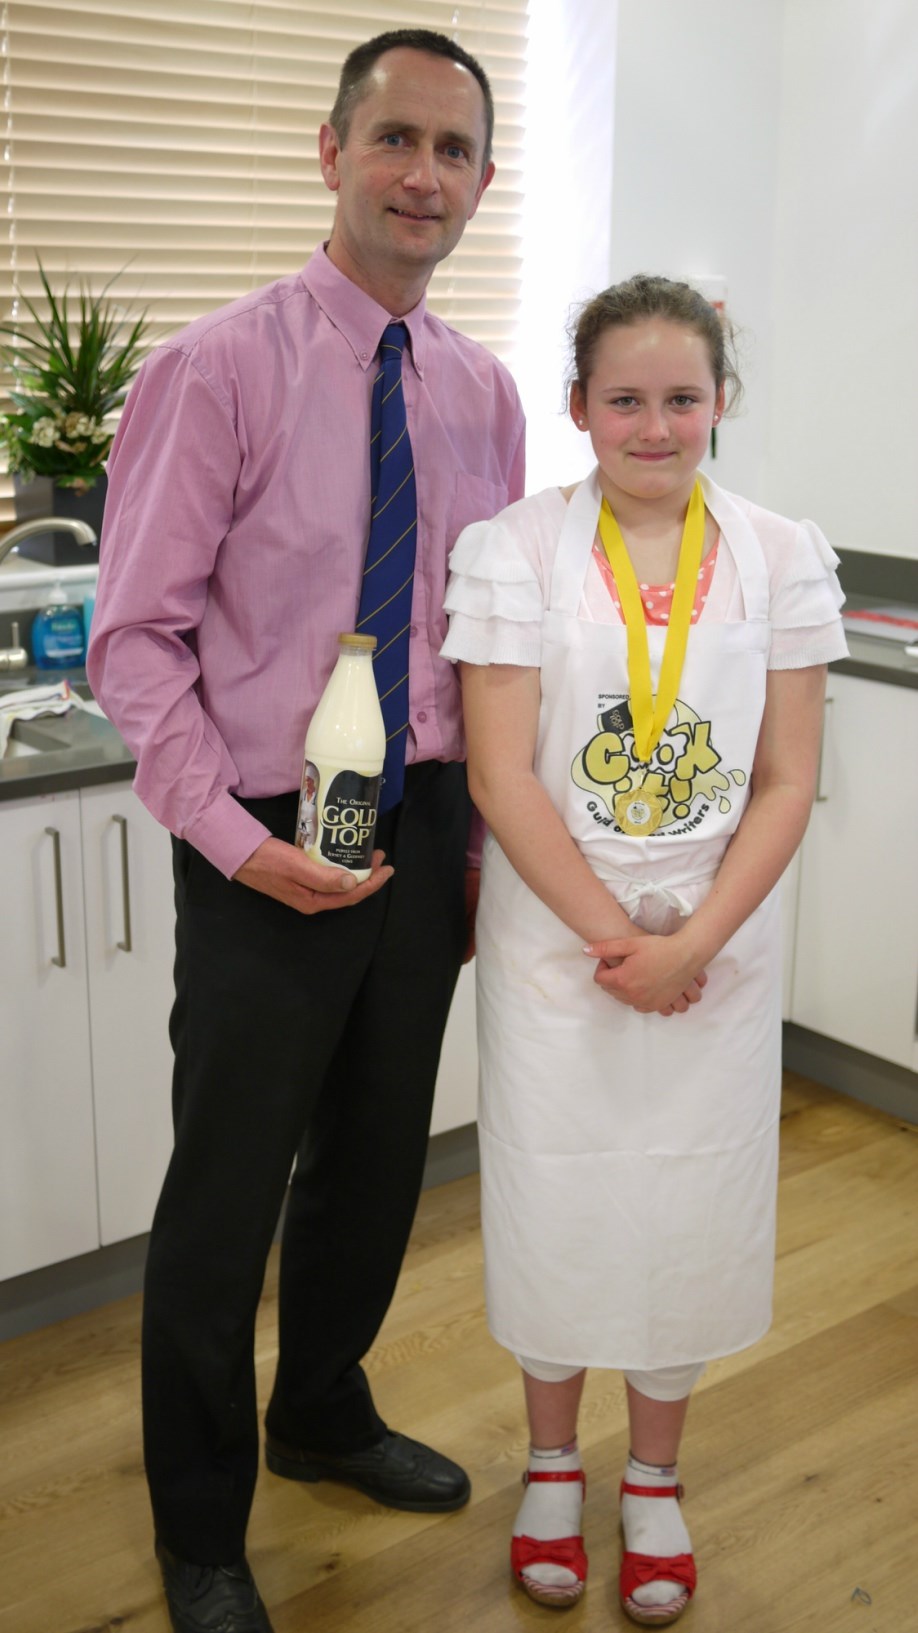 Beth Beeley with Andrew Payling from Gold Top